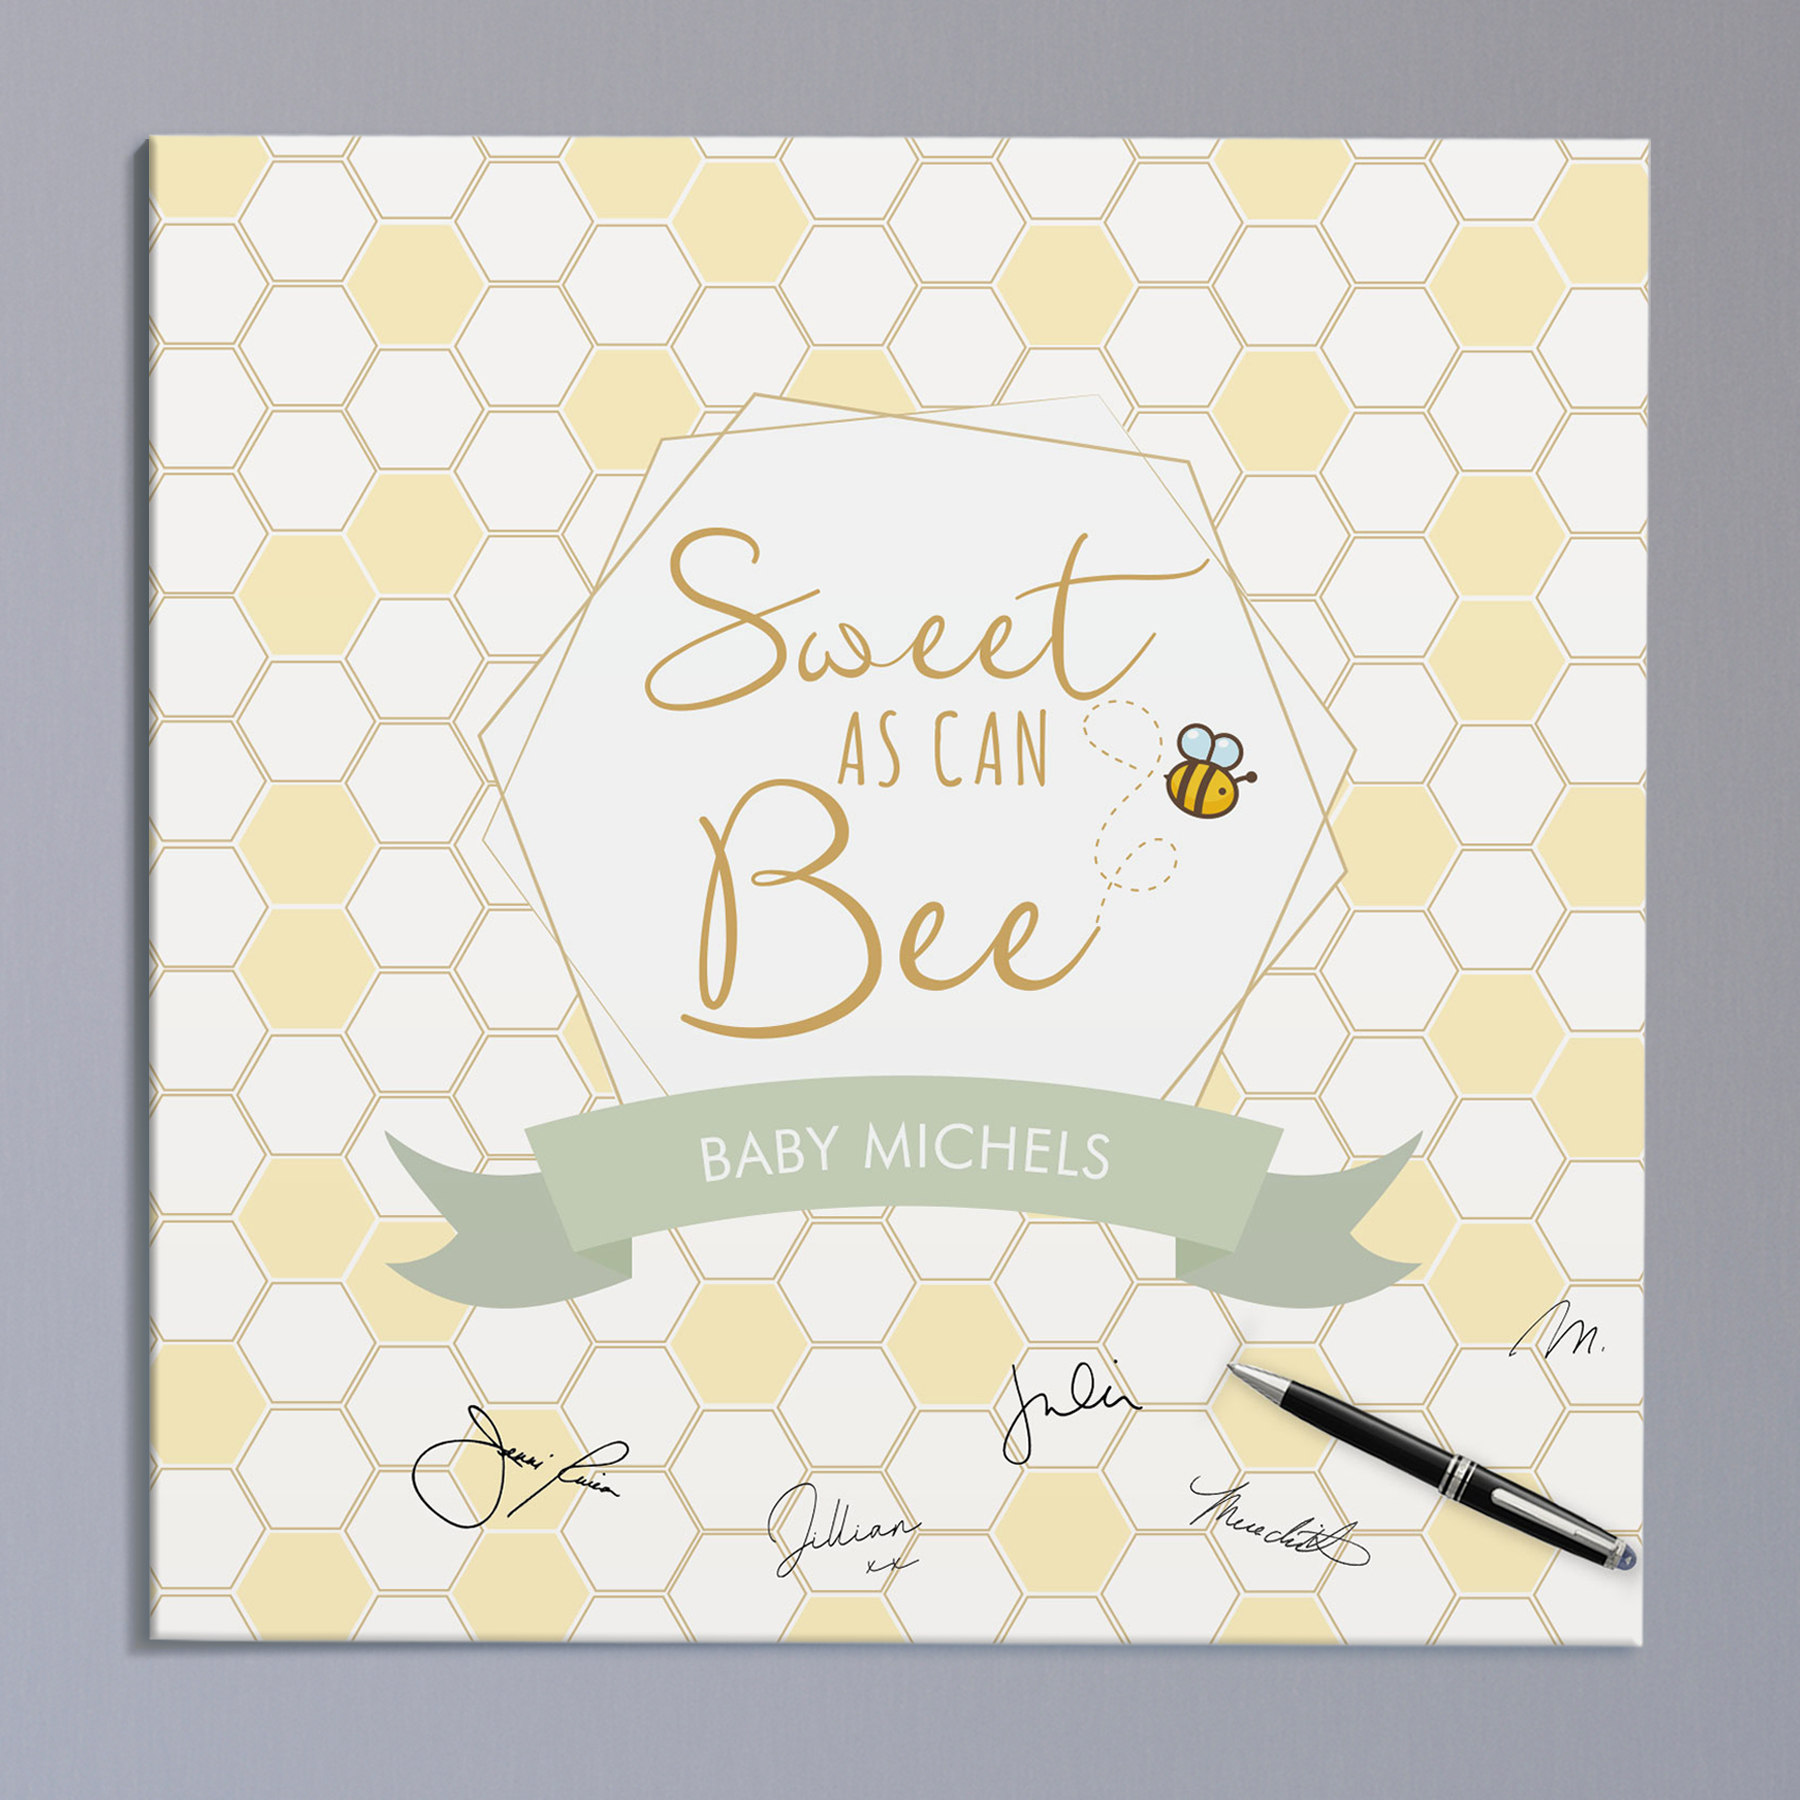 Sweet as Can Bee Alternate Guest Book Canvas  91xxx4X